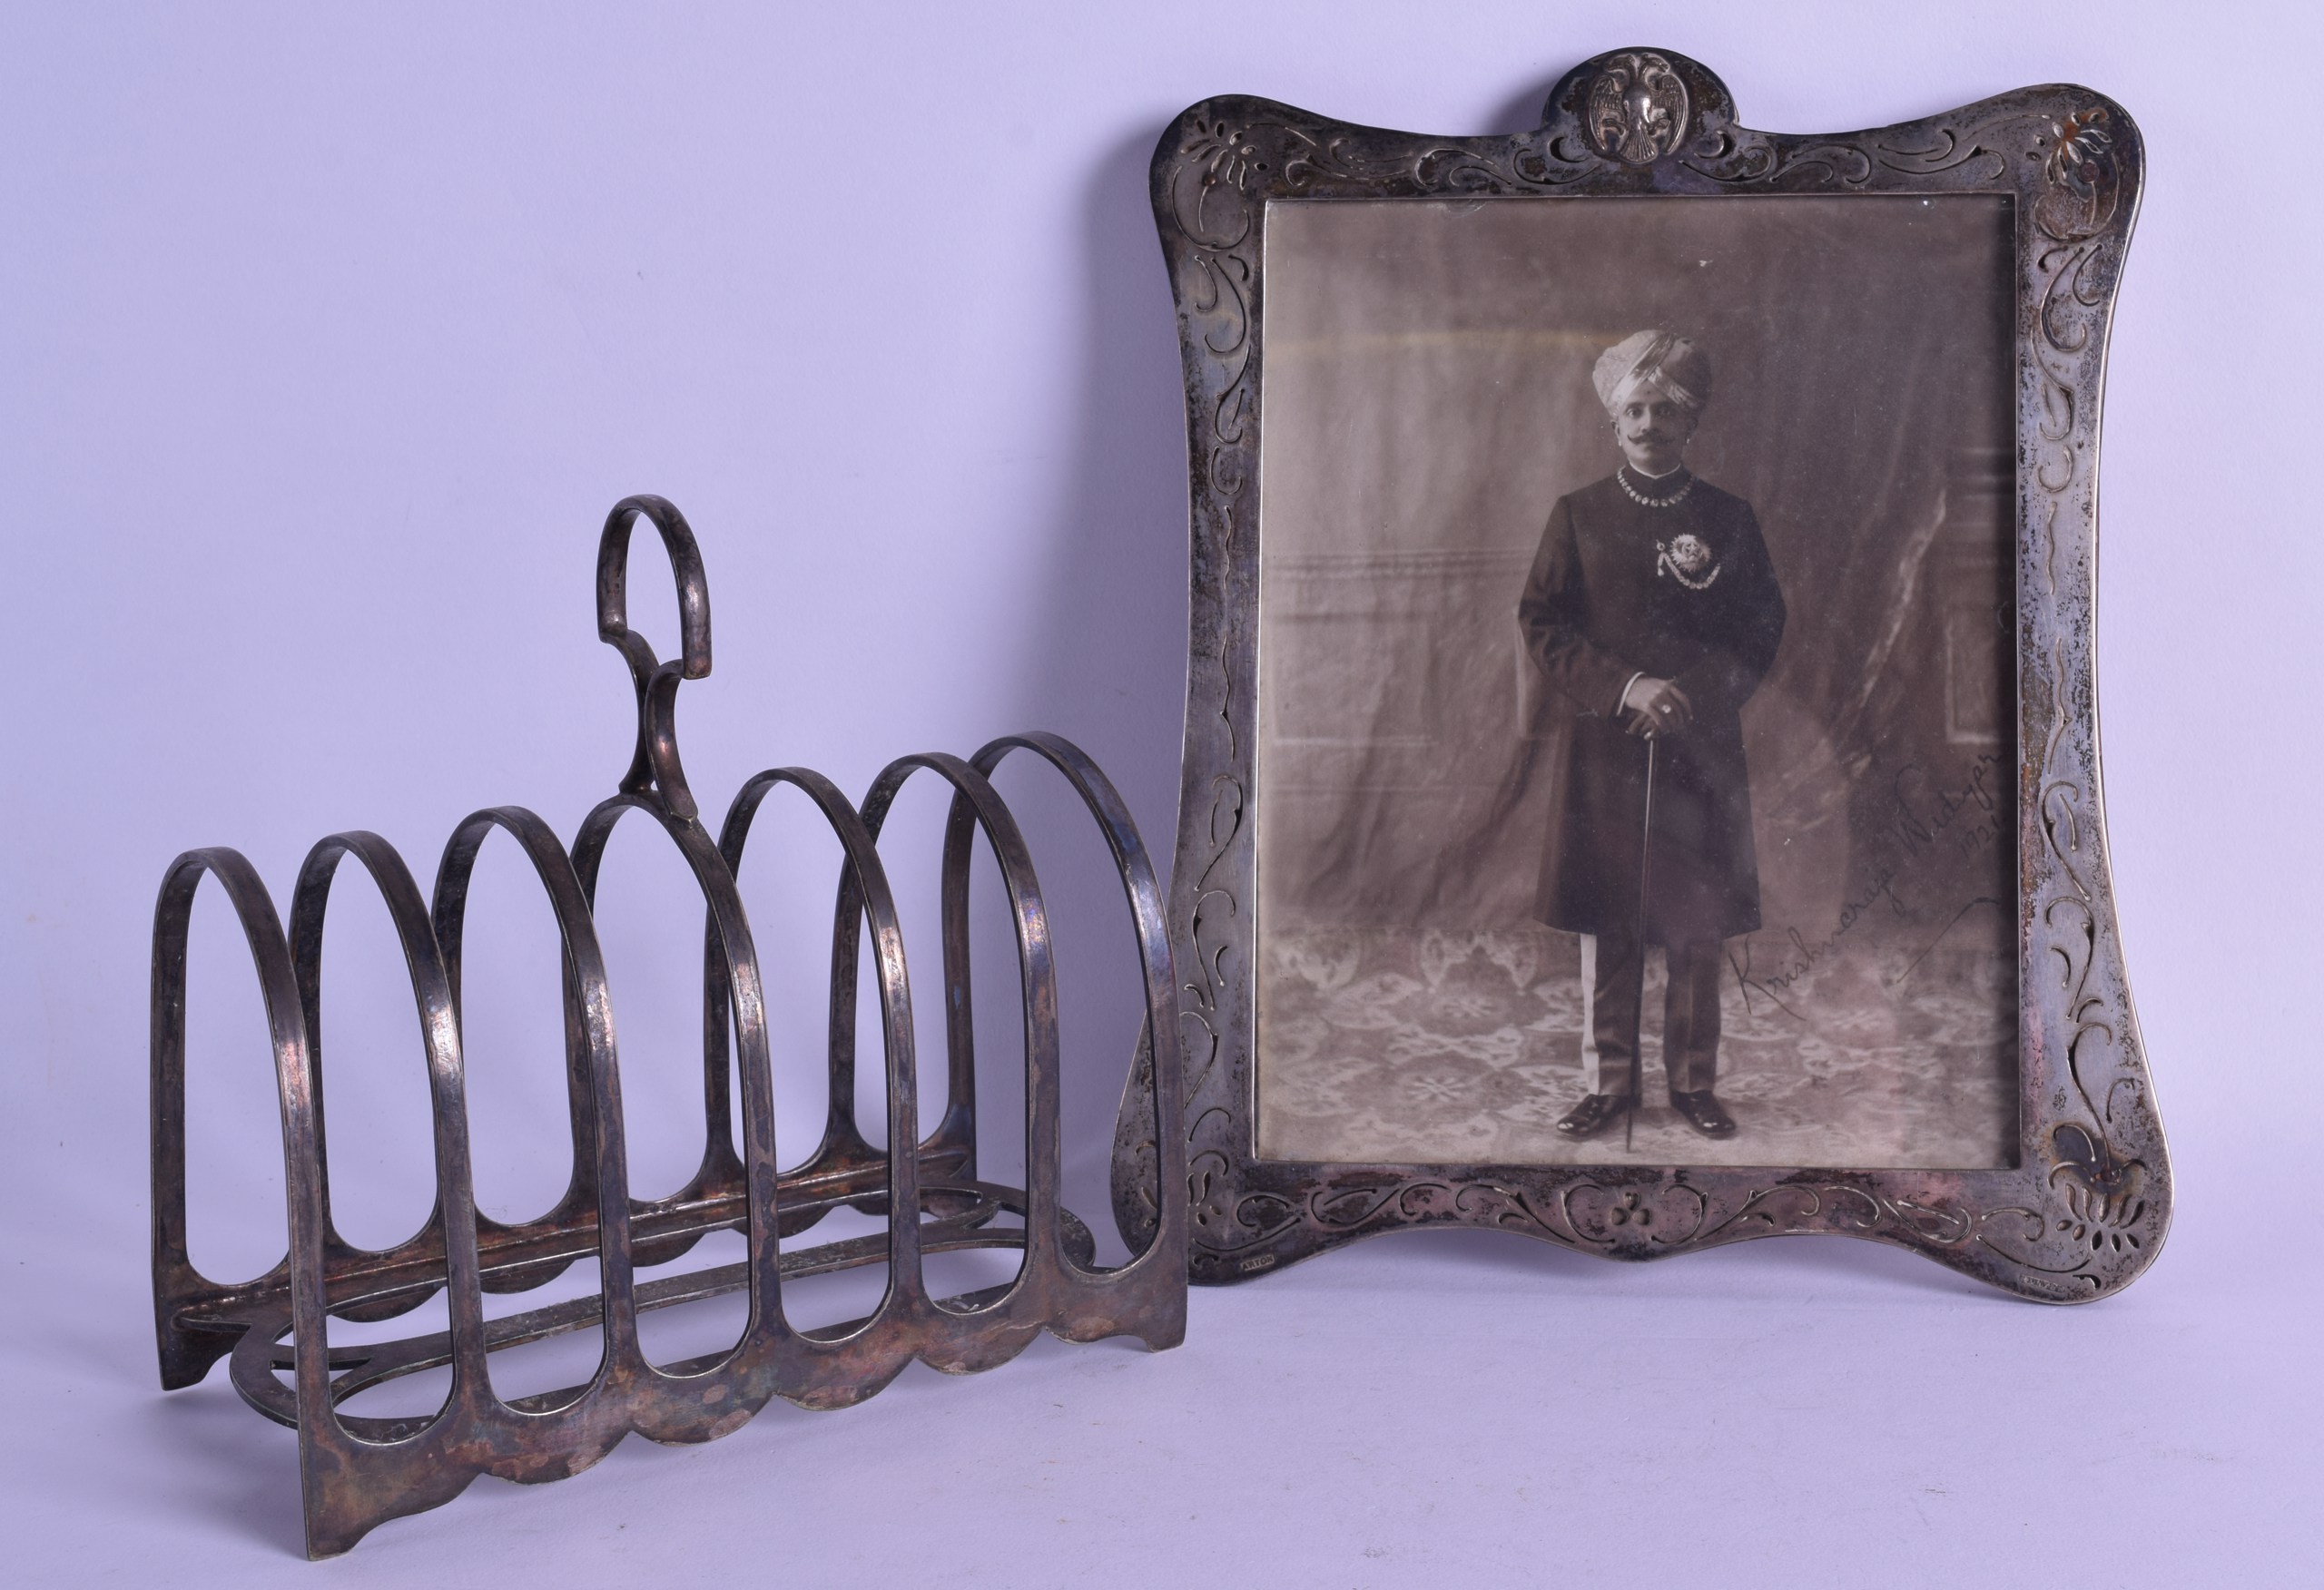 AN EARLY 20TH CENTURY BARTON SILVER PHOTOGRAPH FRAME inset with an image of an Indian male dated